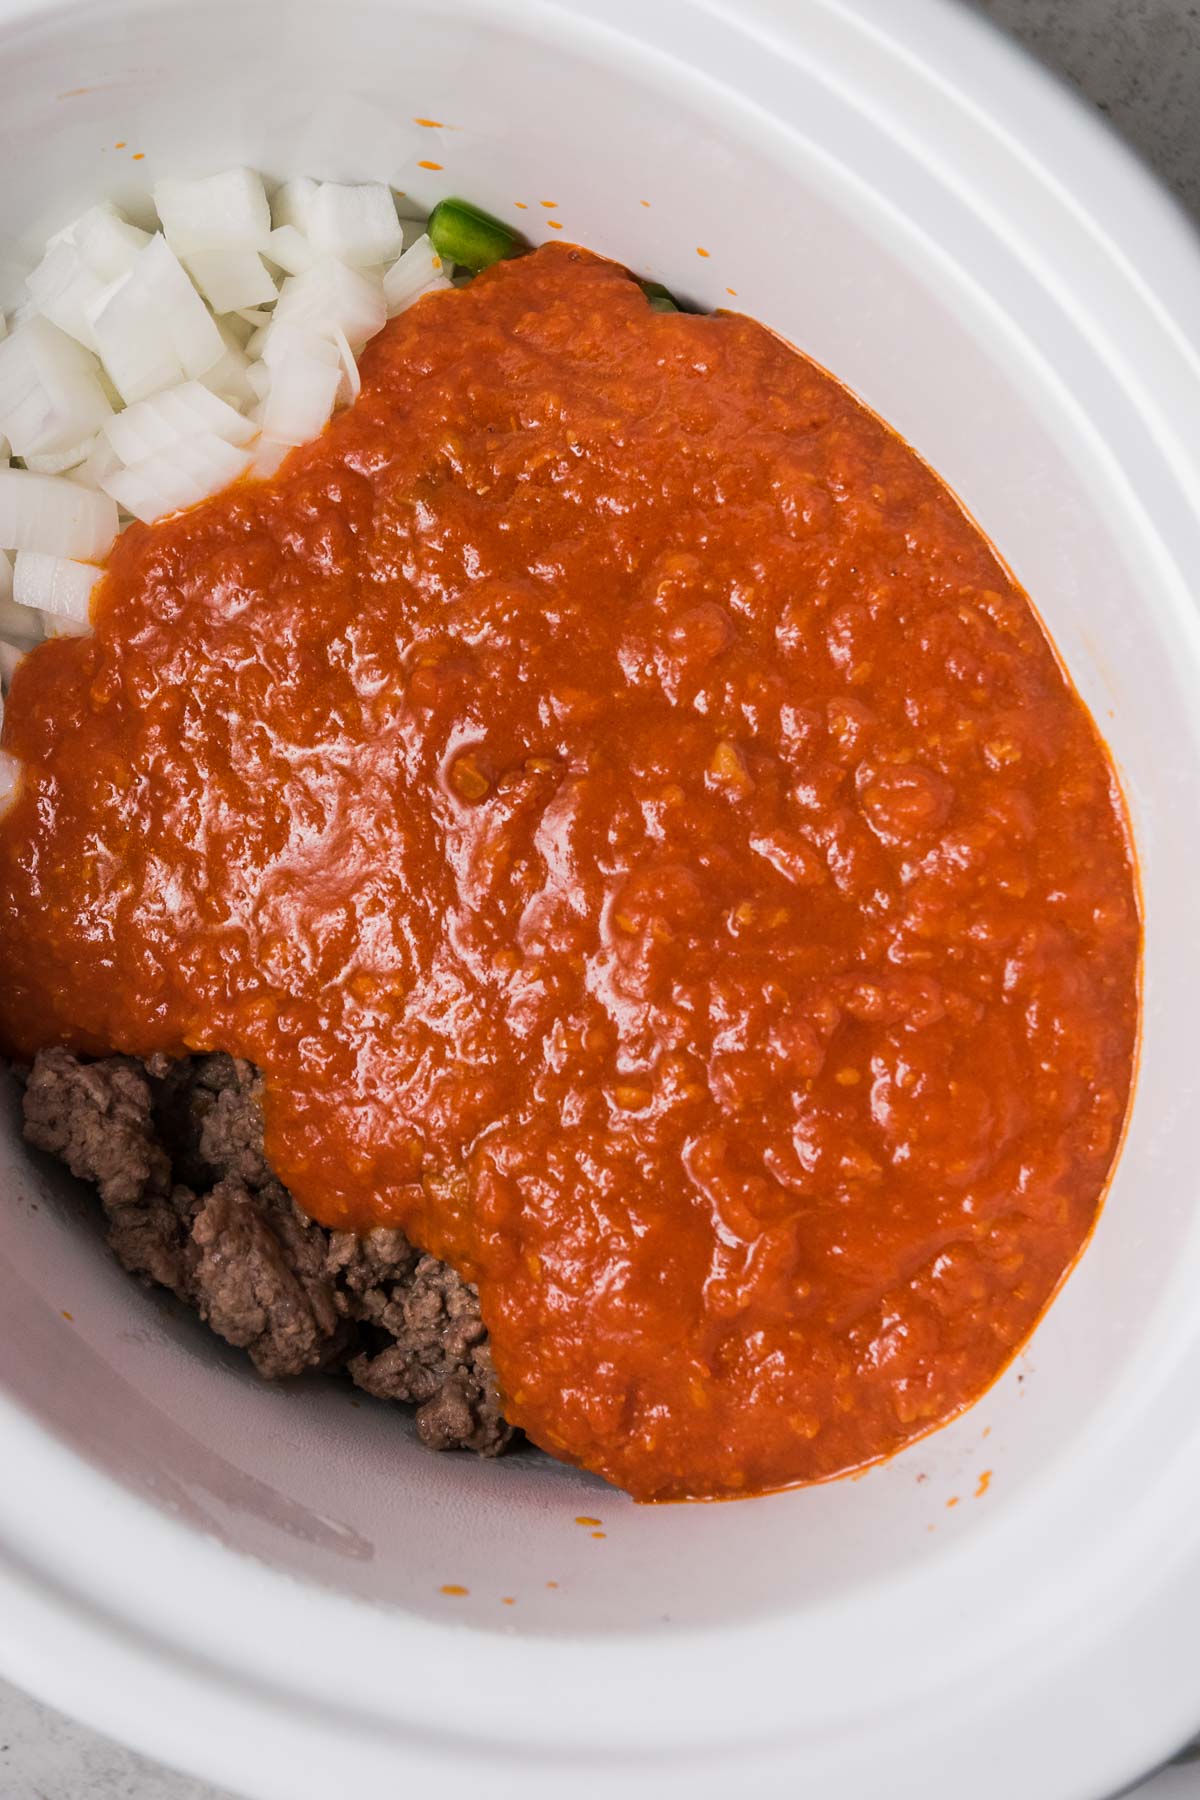 Tomato sauce covers slow cooker goulash ingredients.